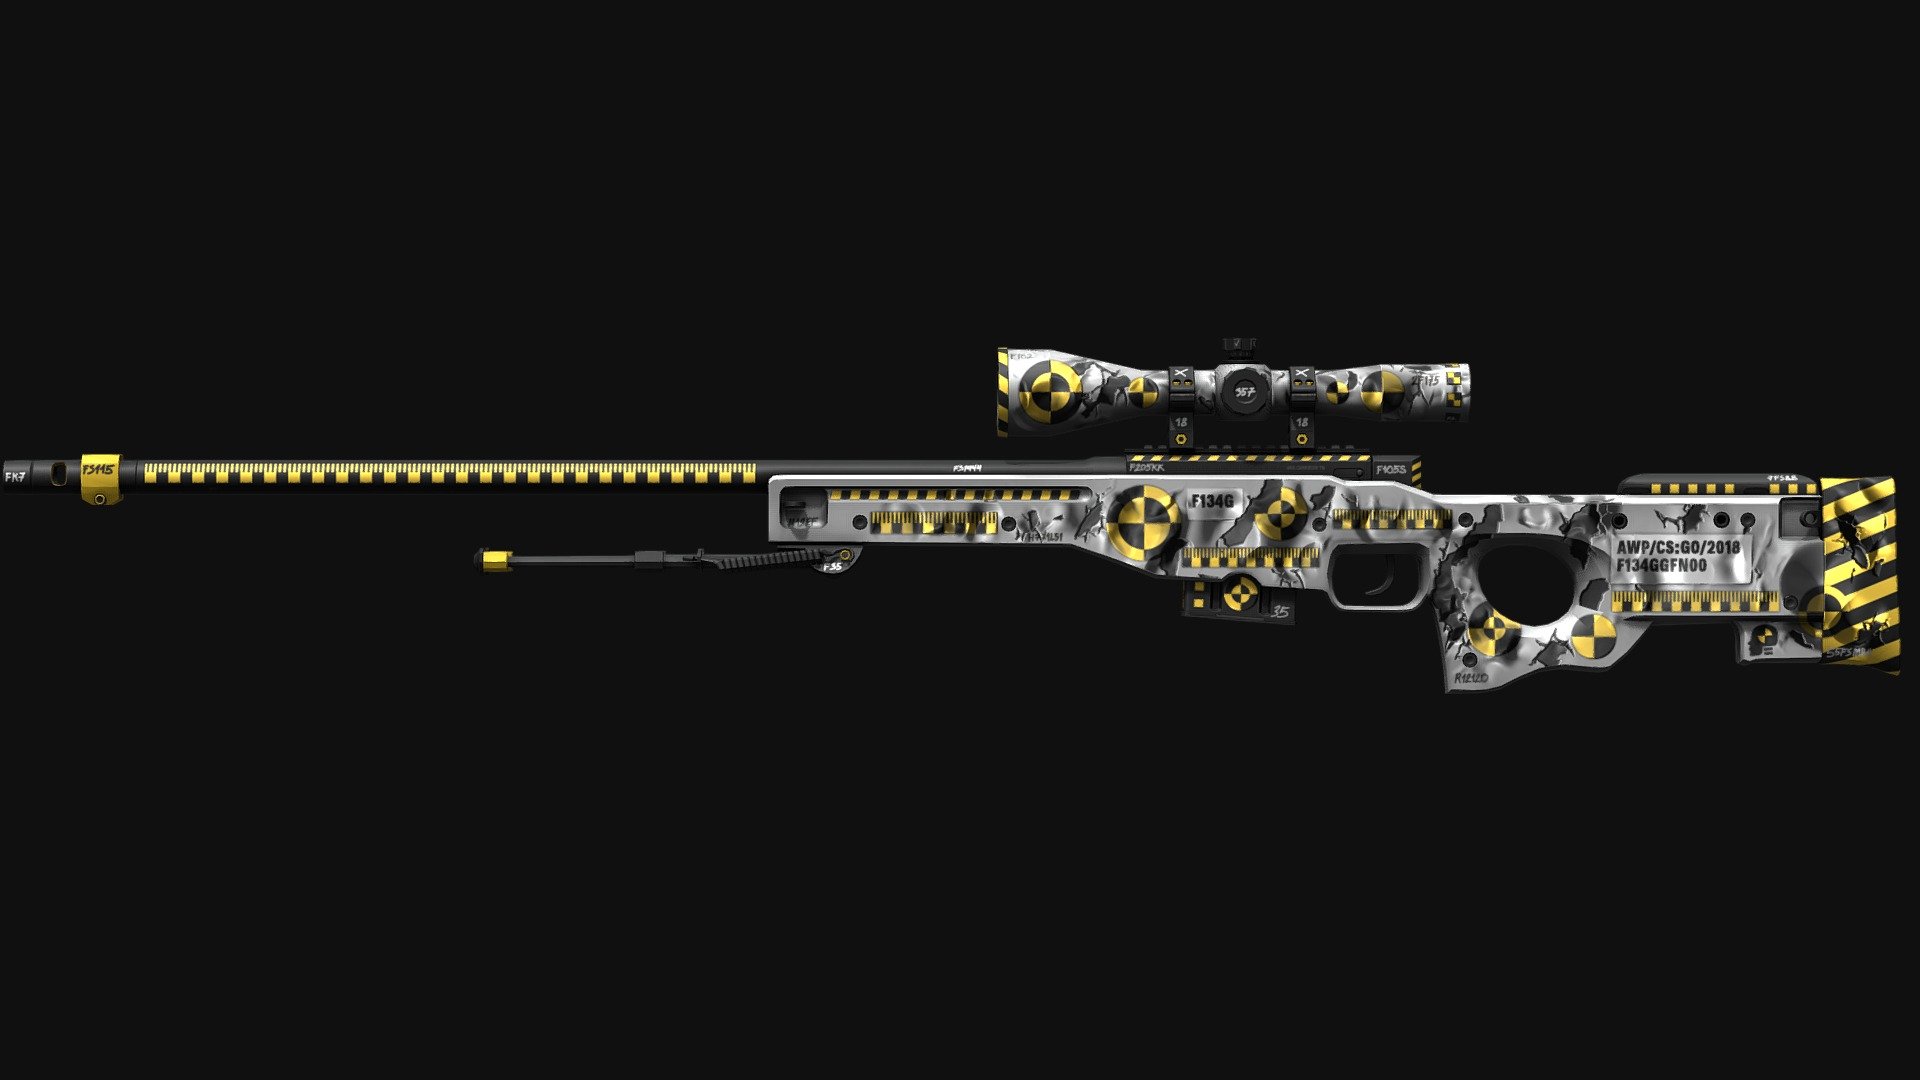 Awp cannons карта мастерская фото 81